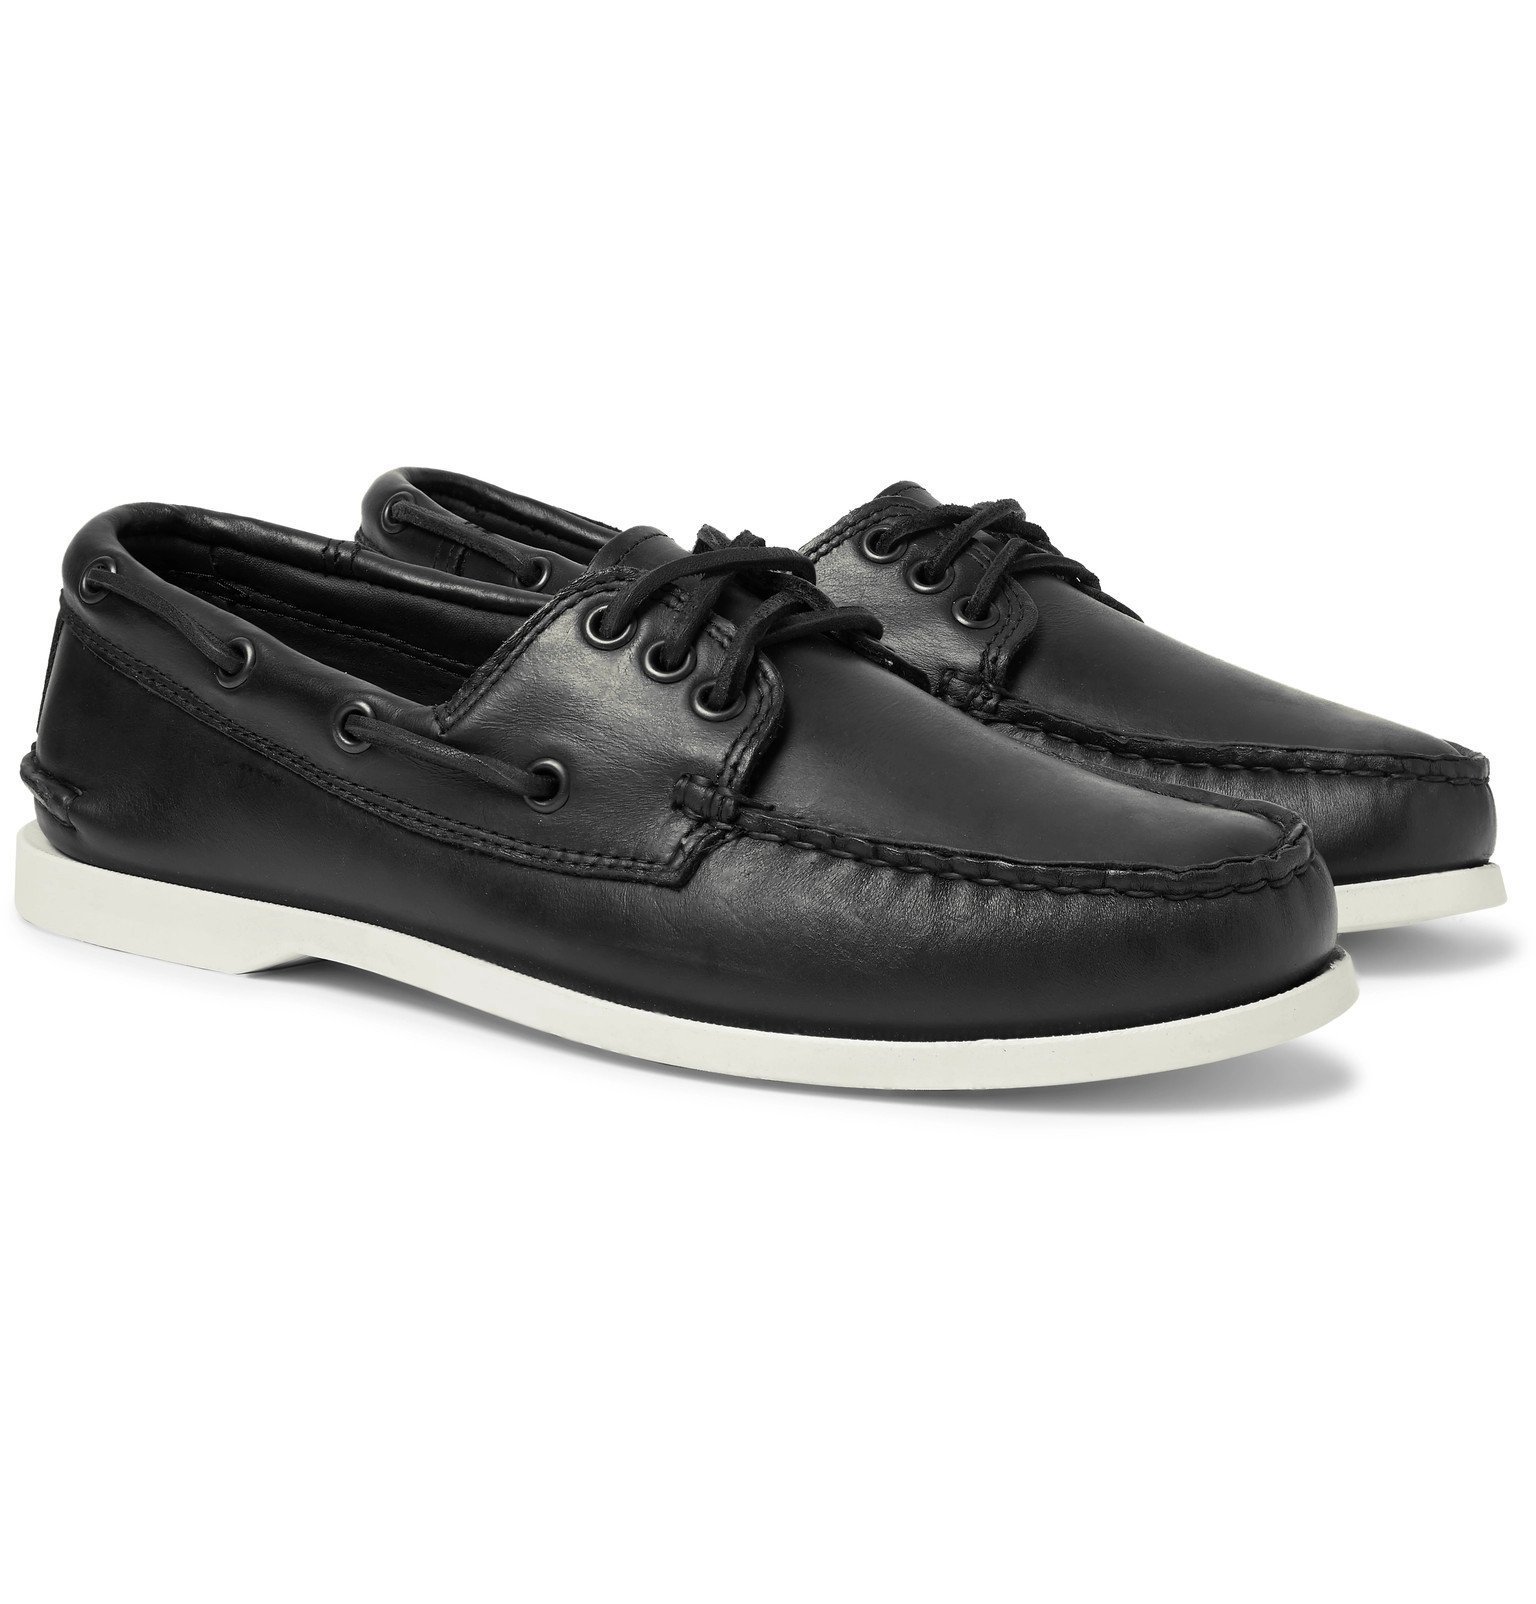 Quoddy - Downeast Leather Boat Shoes - Black Quoddy